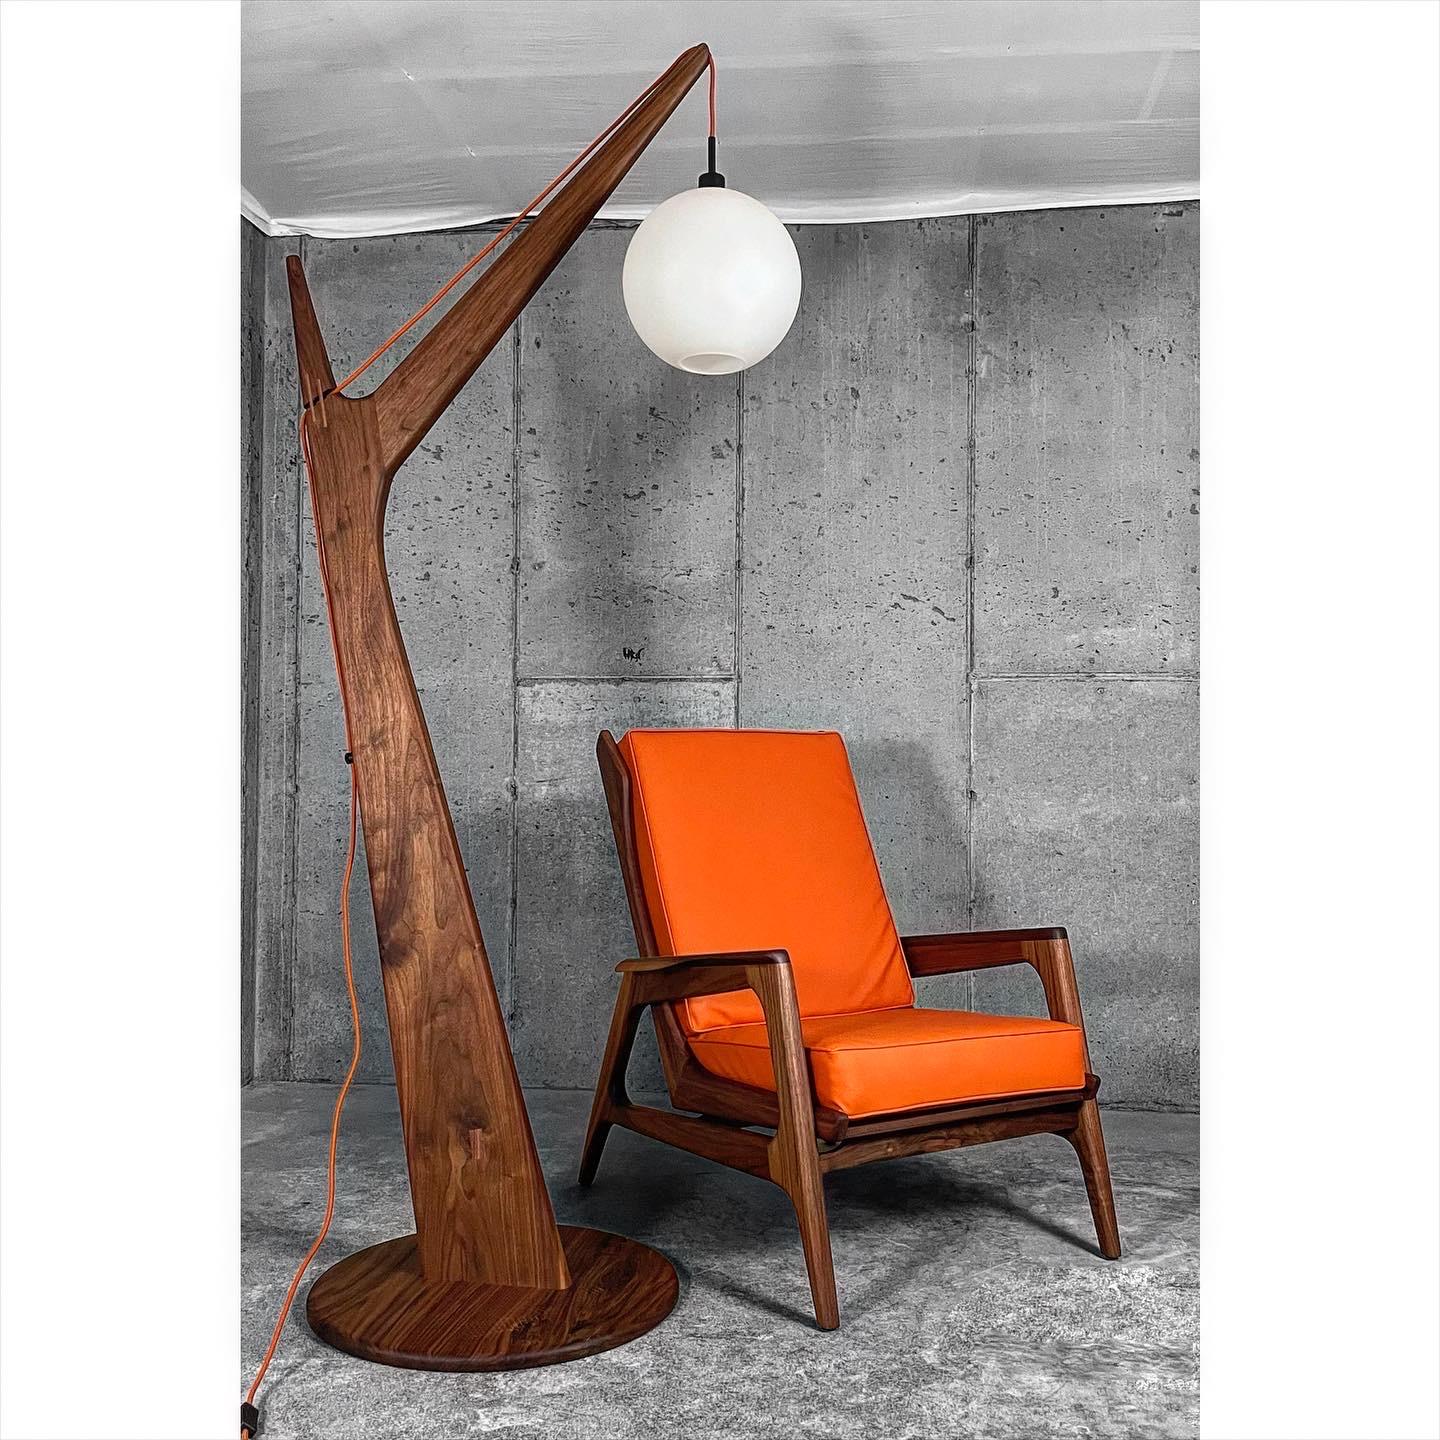 Floor Lamp No.1 was designed to simply hold a lamp cord and pendant light made by Color Cord Company. Each lamp has its own unique grain pattern and may contain bow ties on cracks or patched knots. Every piece of lumber is picked intentionally to